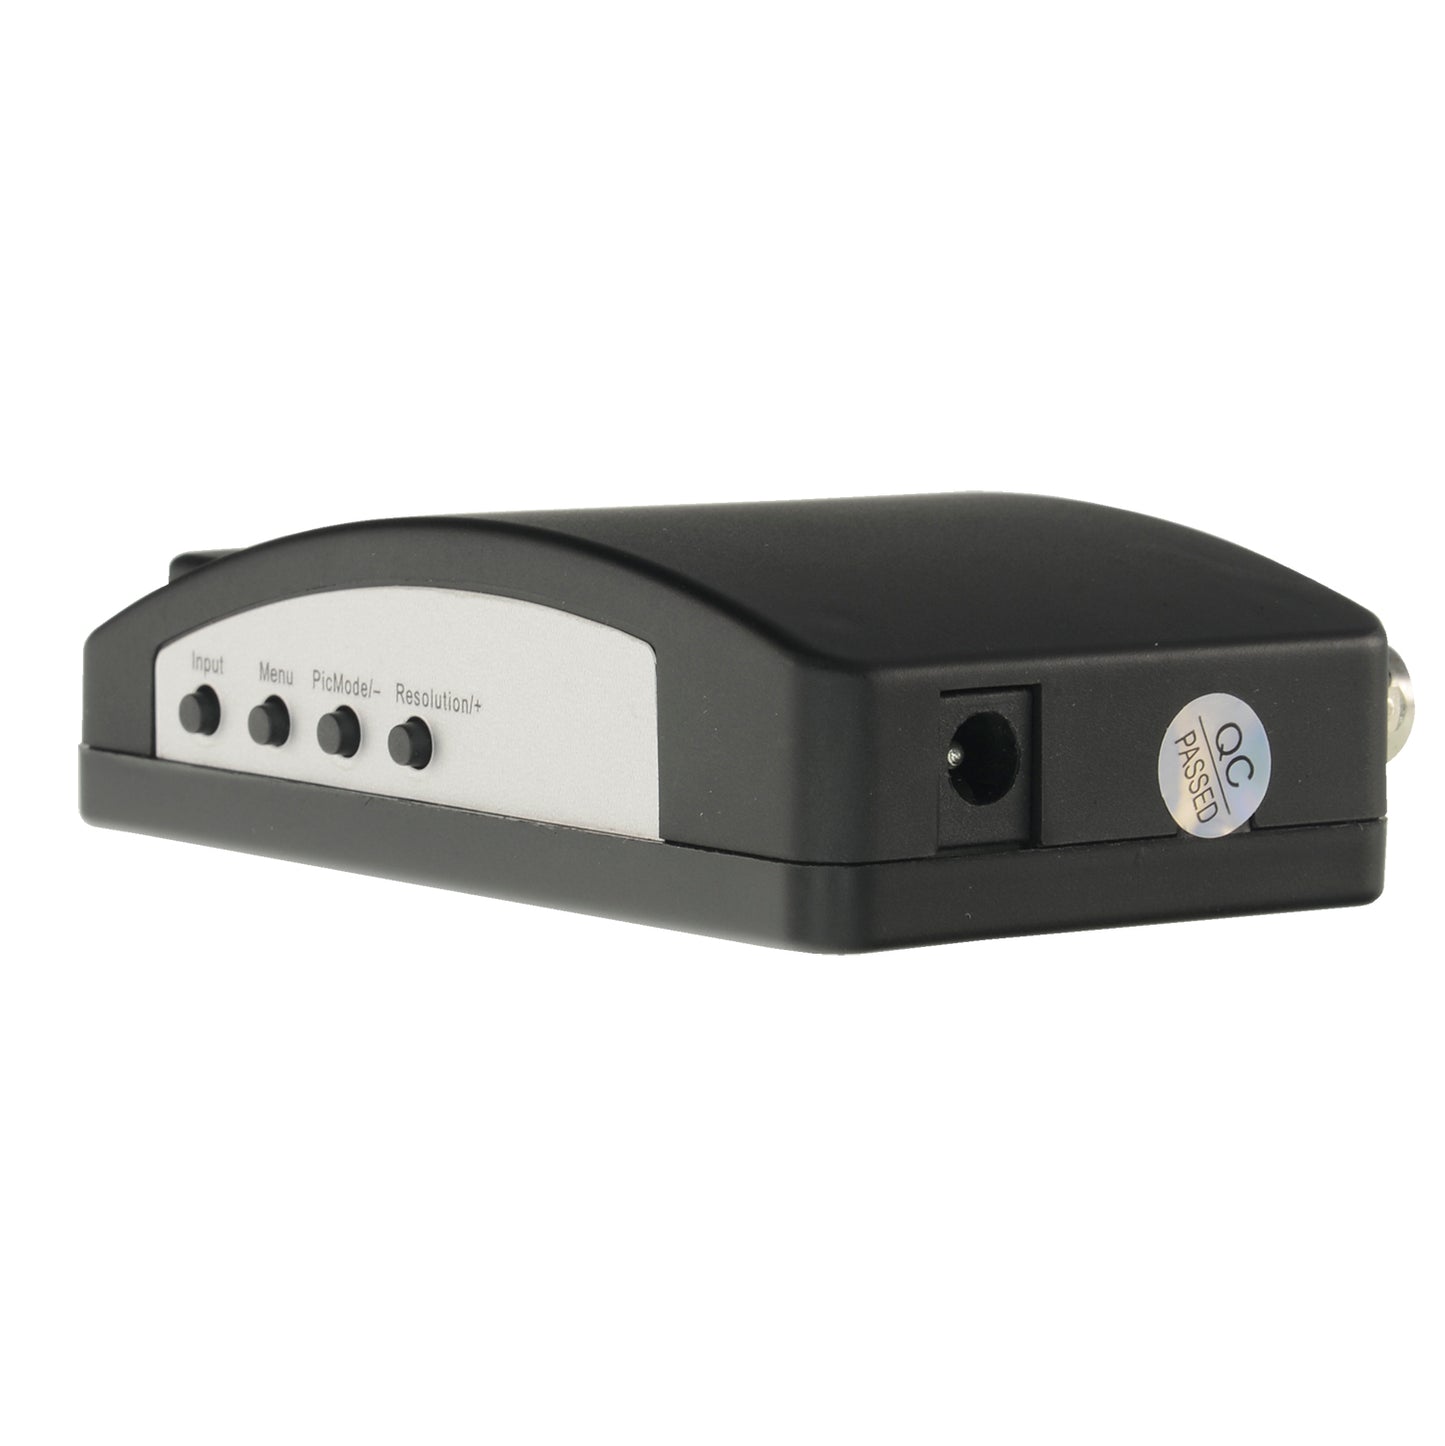 Video adapter - Inputs: VGA, SVIDEO or Video BNC - Output: VGA - Multiple resolutions supported - Video system NTSC, PAL and SECAM - Image settings via OSD menu